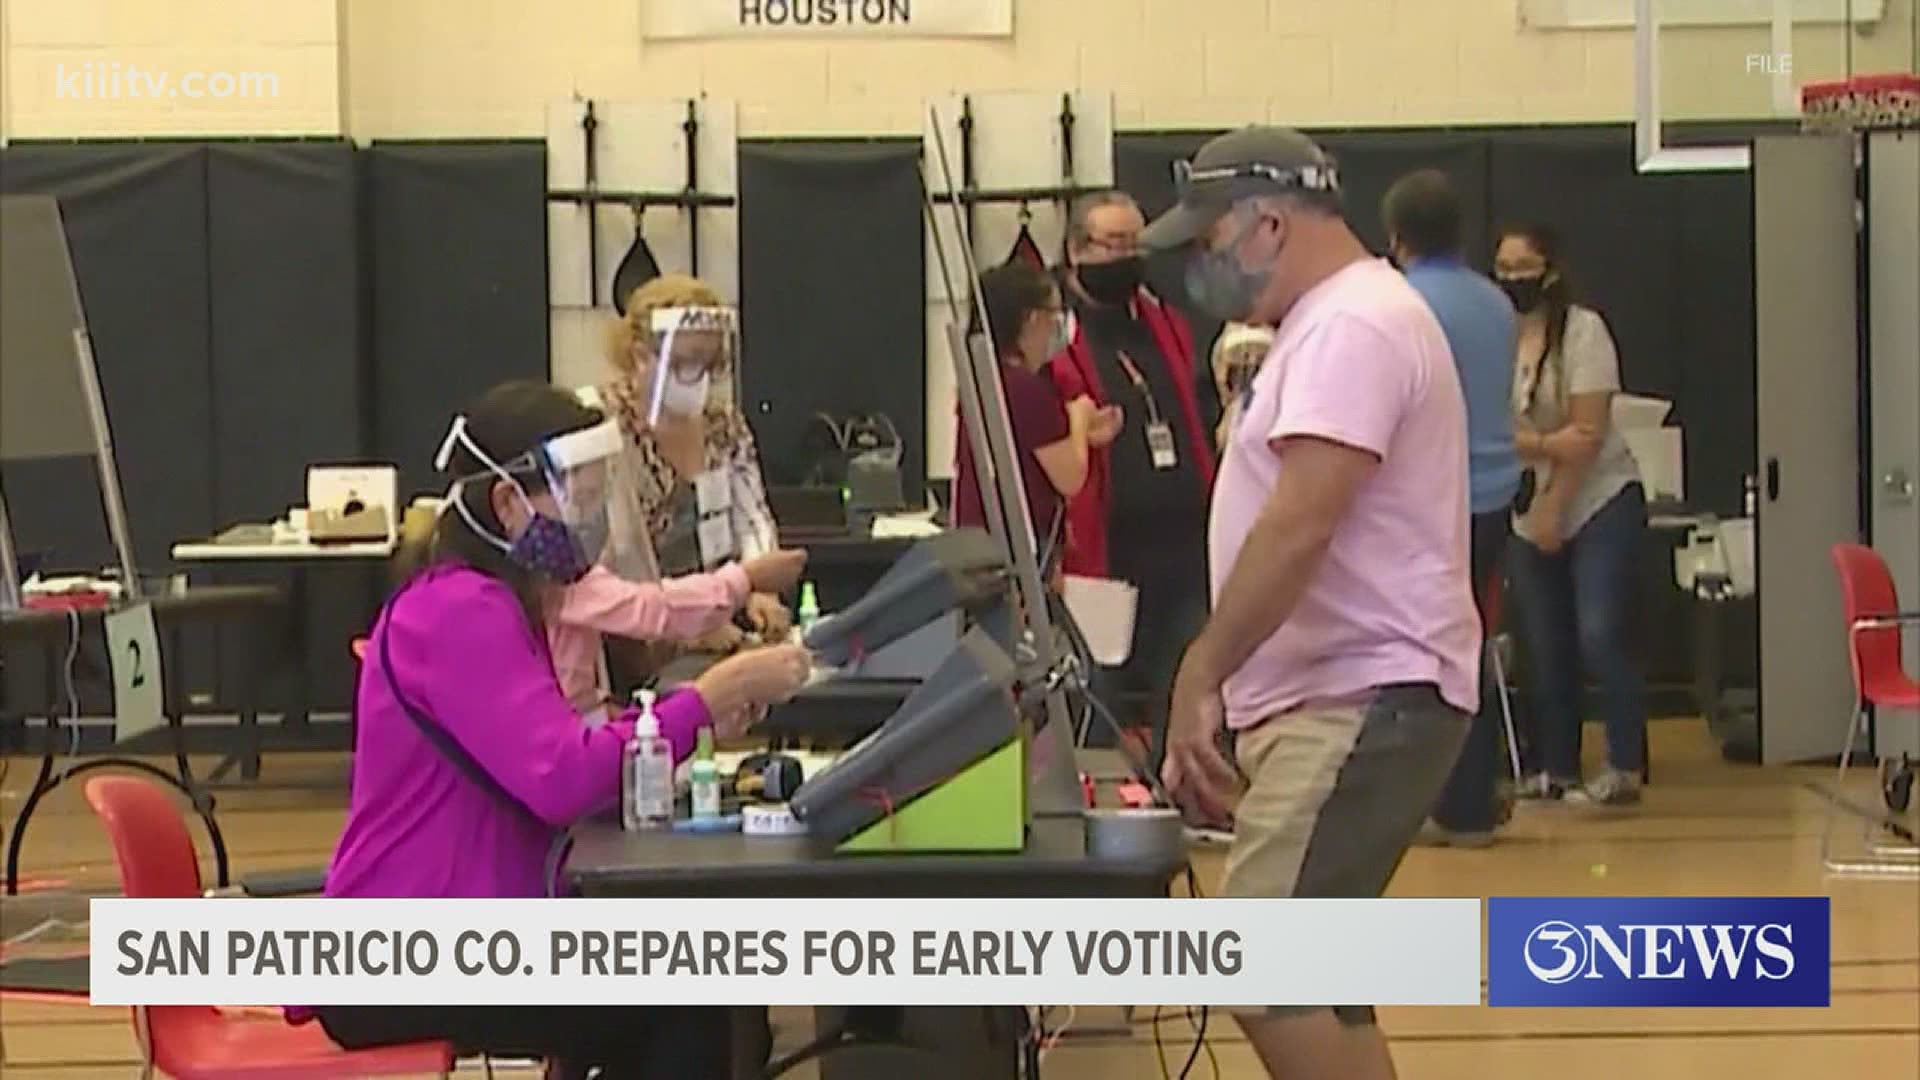 3News spoke with San Patricio County Elections Administrator about how the county is preparing voting locations in the middle of a pandemic.